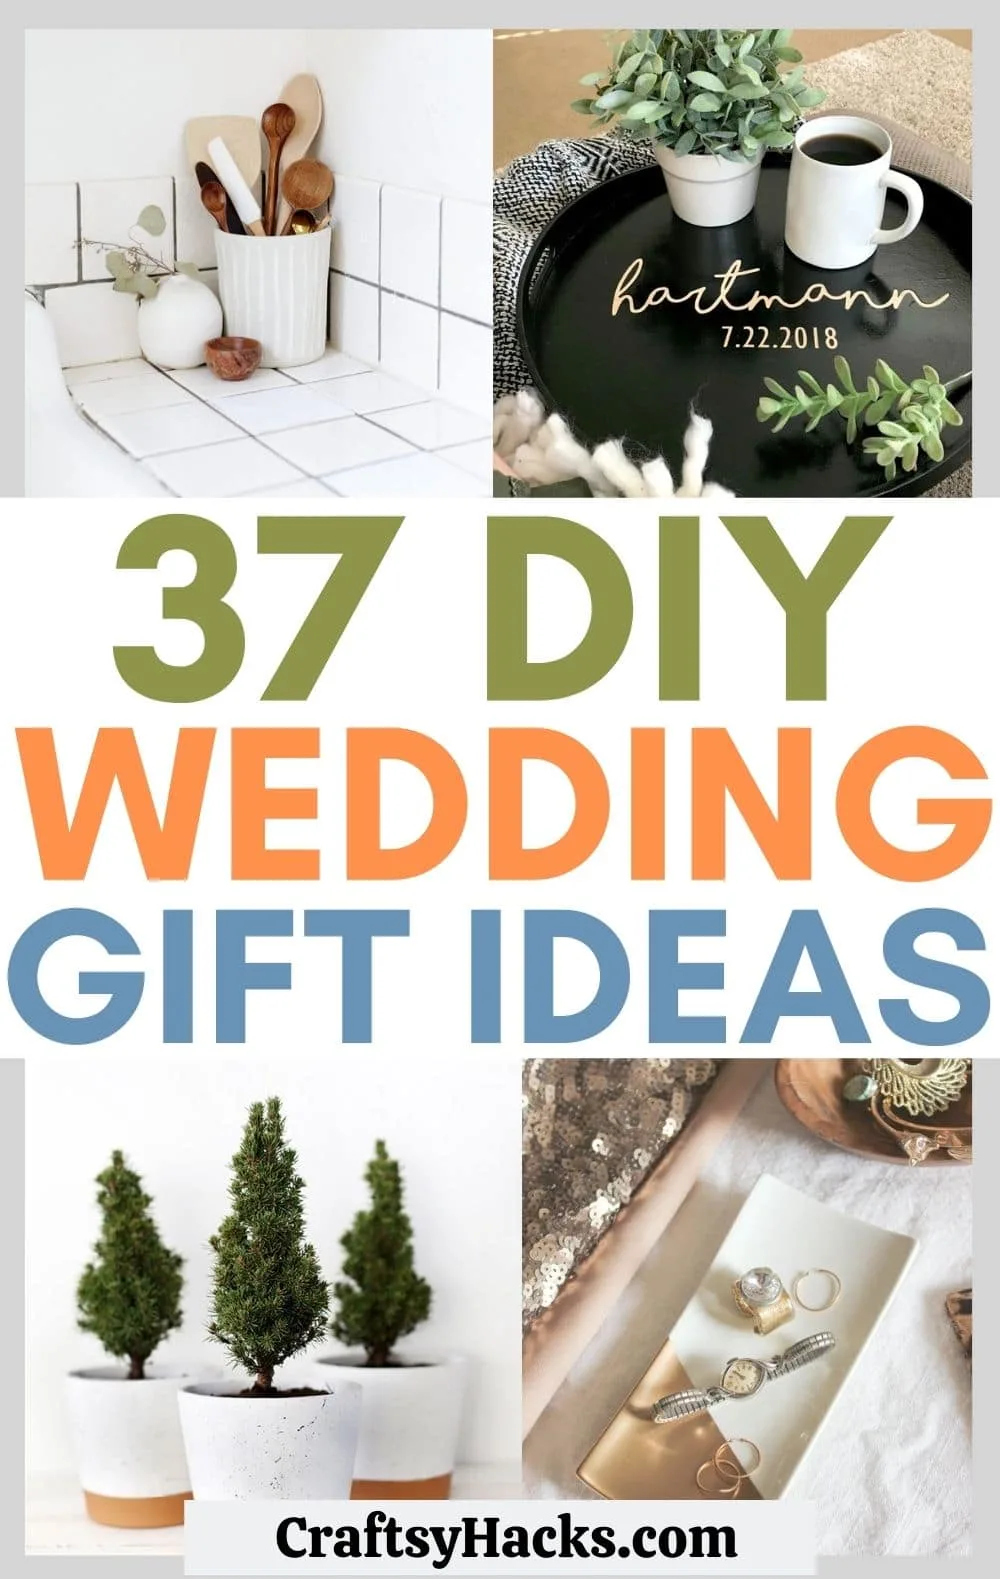 3 Exclusive Wedding Gifts That Make an Impression  Rediffcom